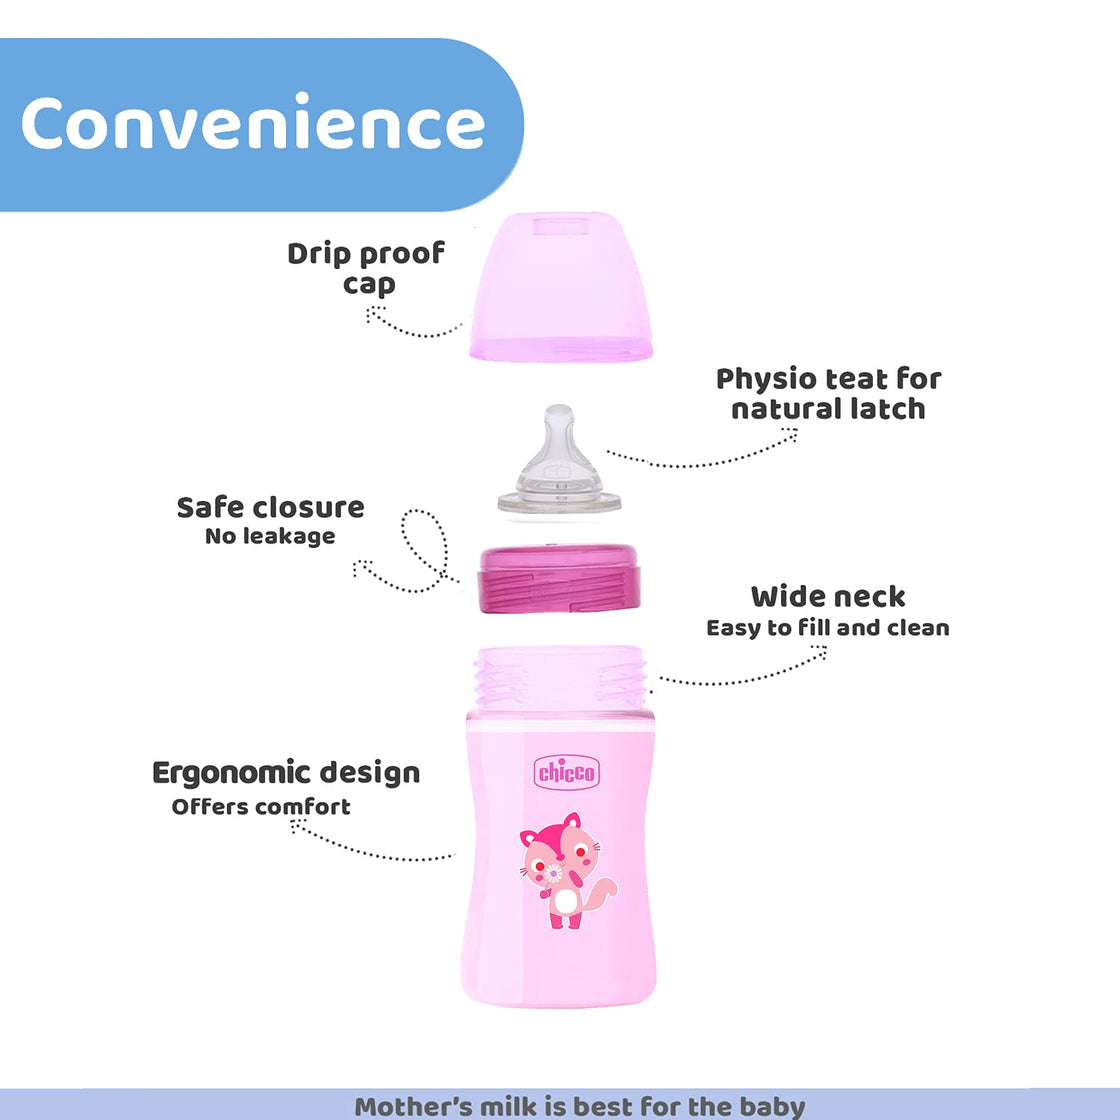 Chicco Well-Being Baby Coloured Feeding Bottle for Babies & Toddlers, 150ml, Pink